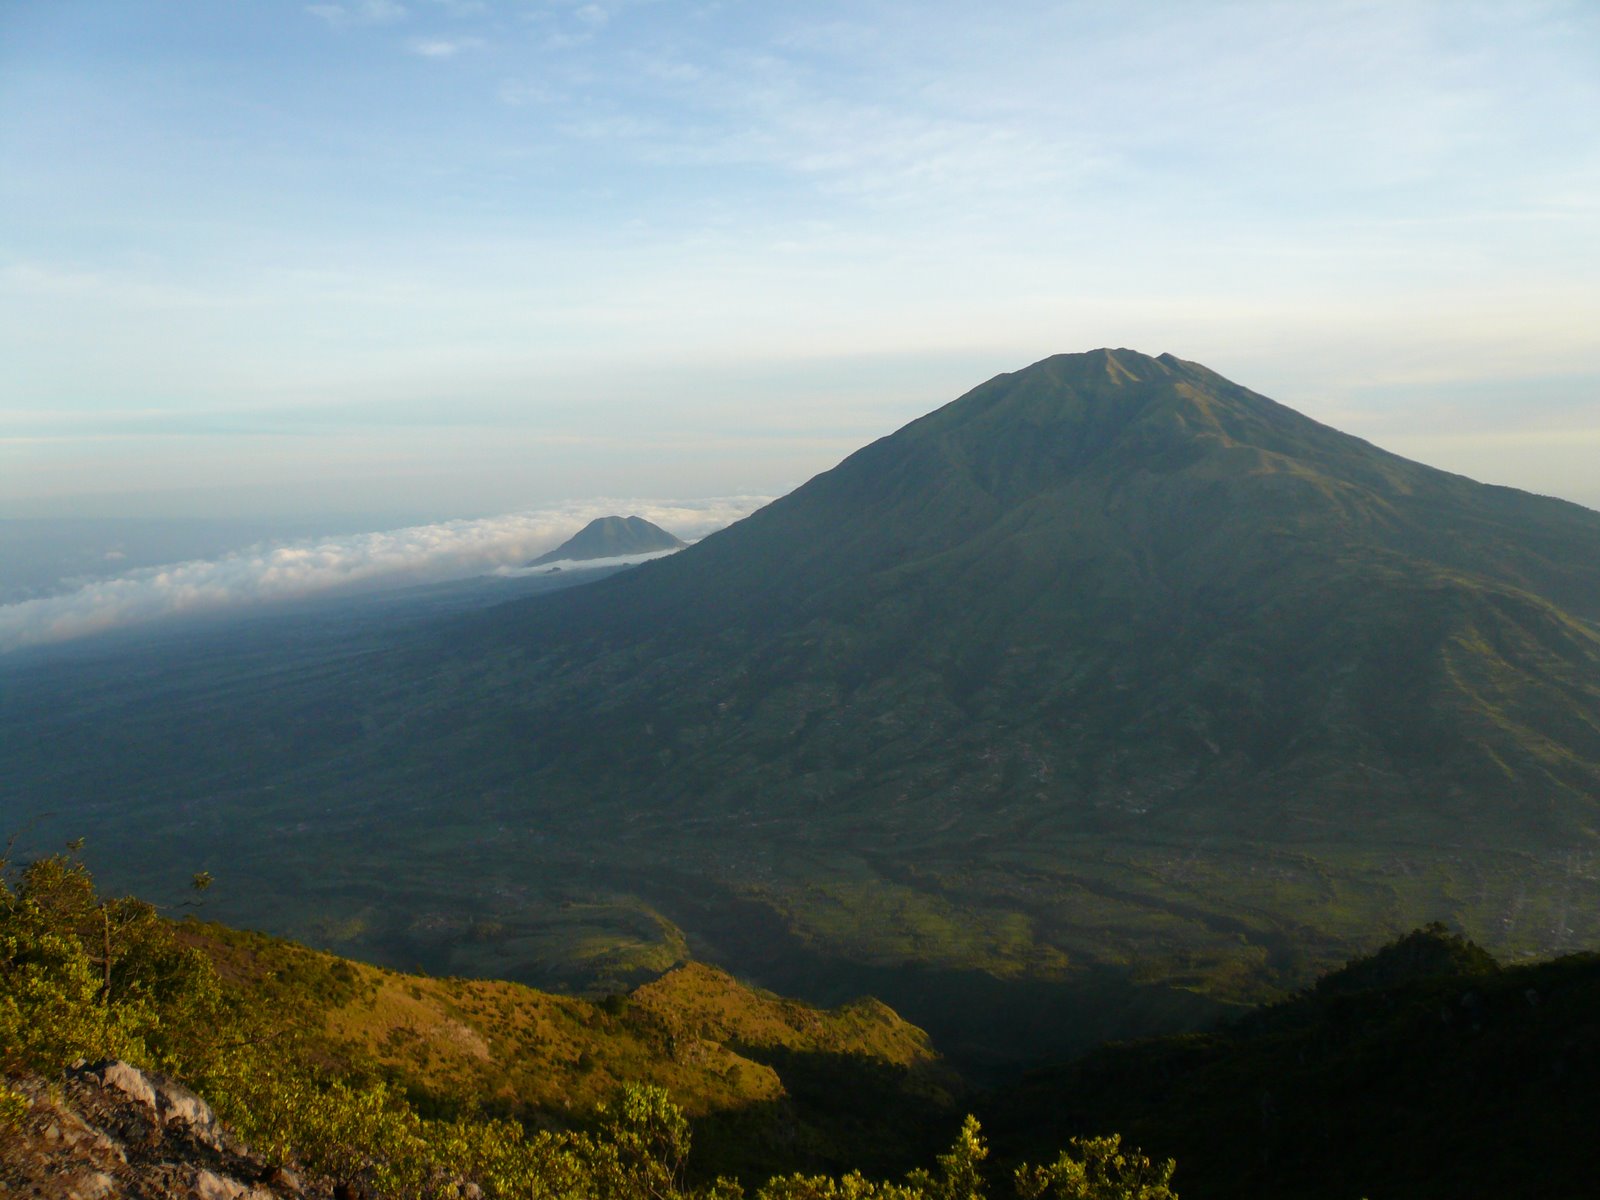 From Mt. Merapi